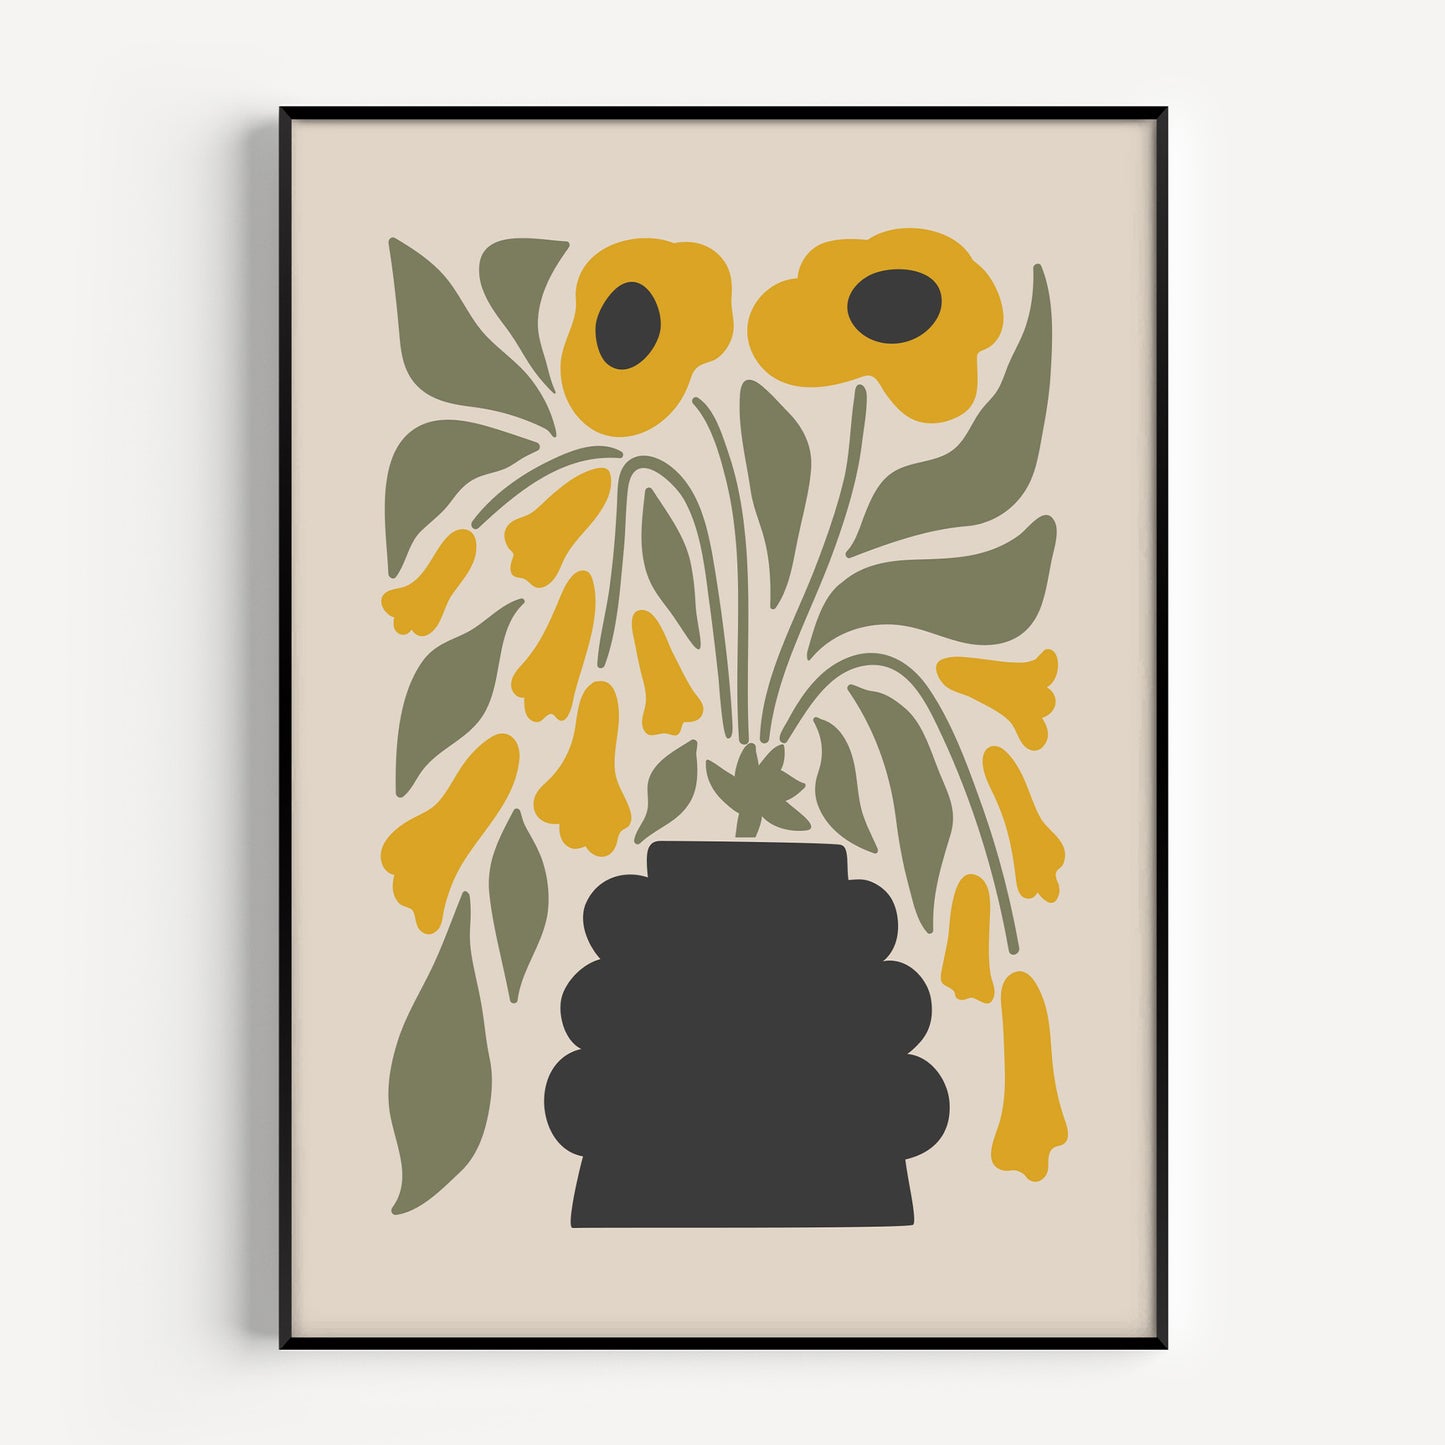 Flower print in green and yellow with a minimalist style